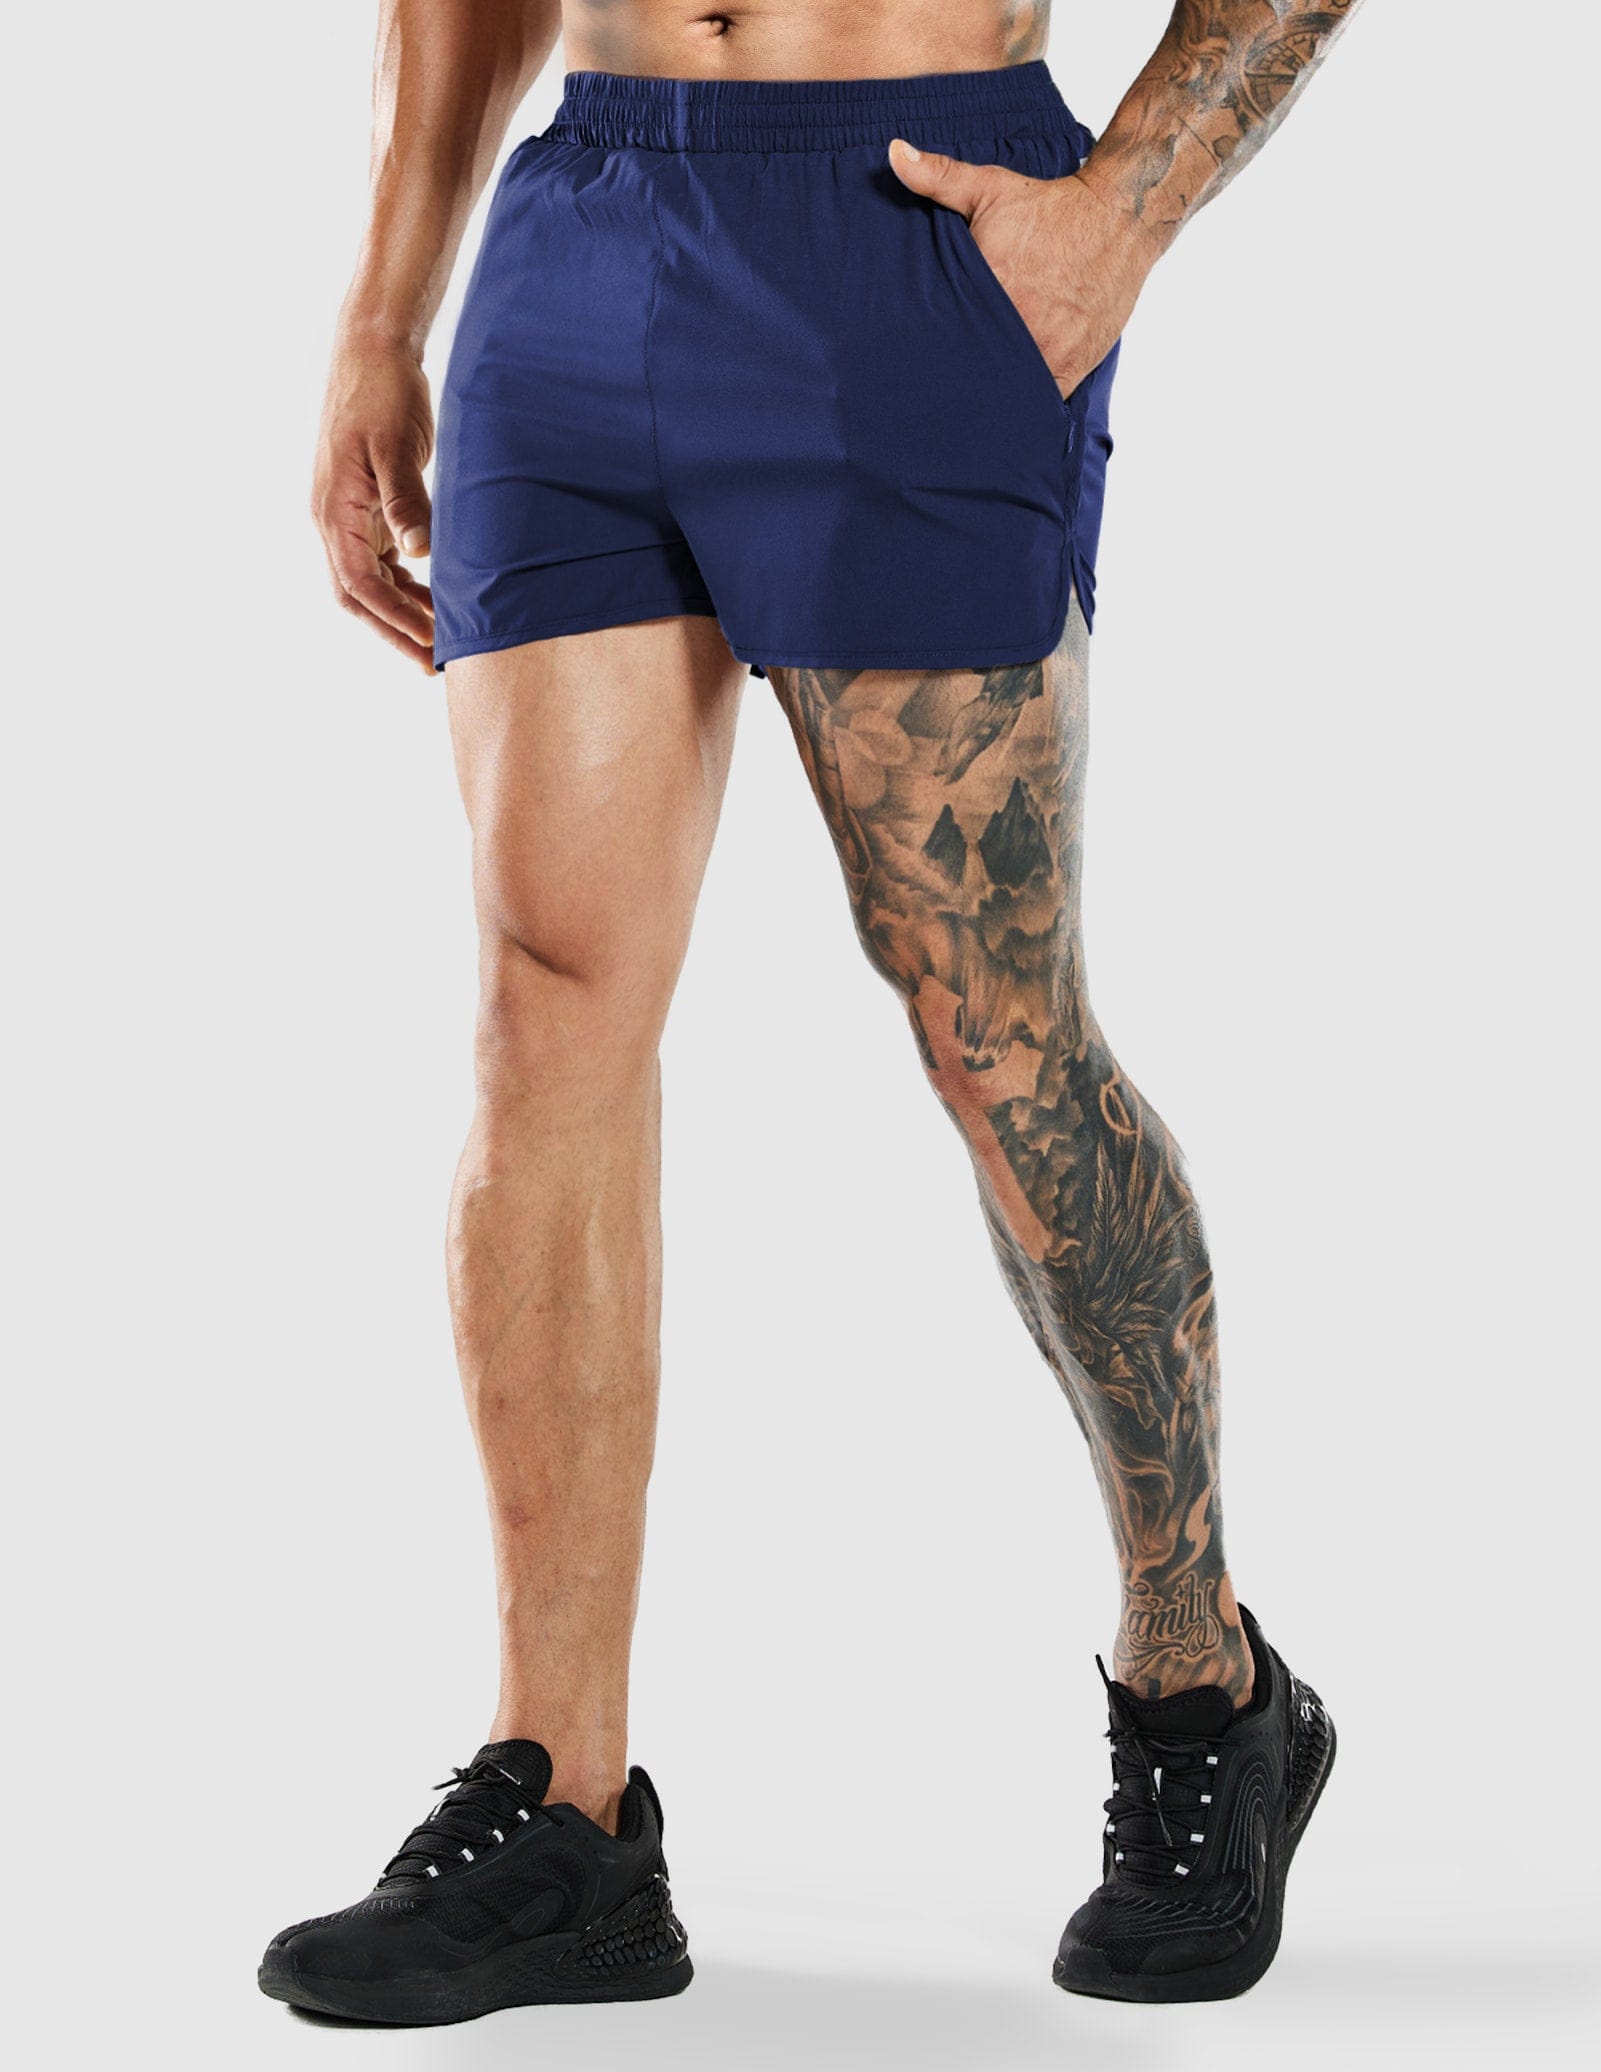 Men's 3 Inches Quick Dry Running Shorts with Liner Zip Pockets Men's Shorts MIER